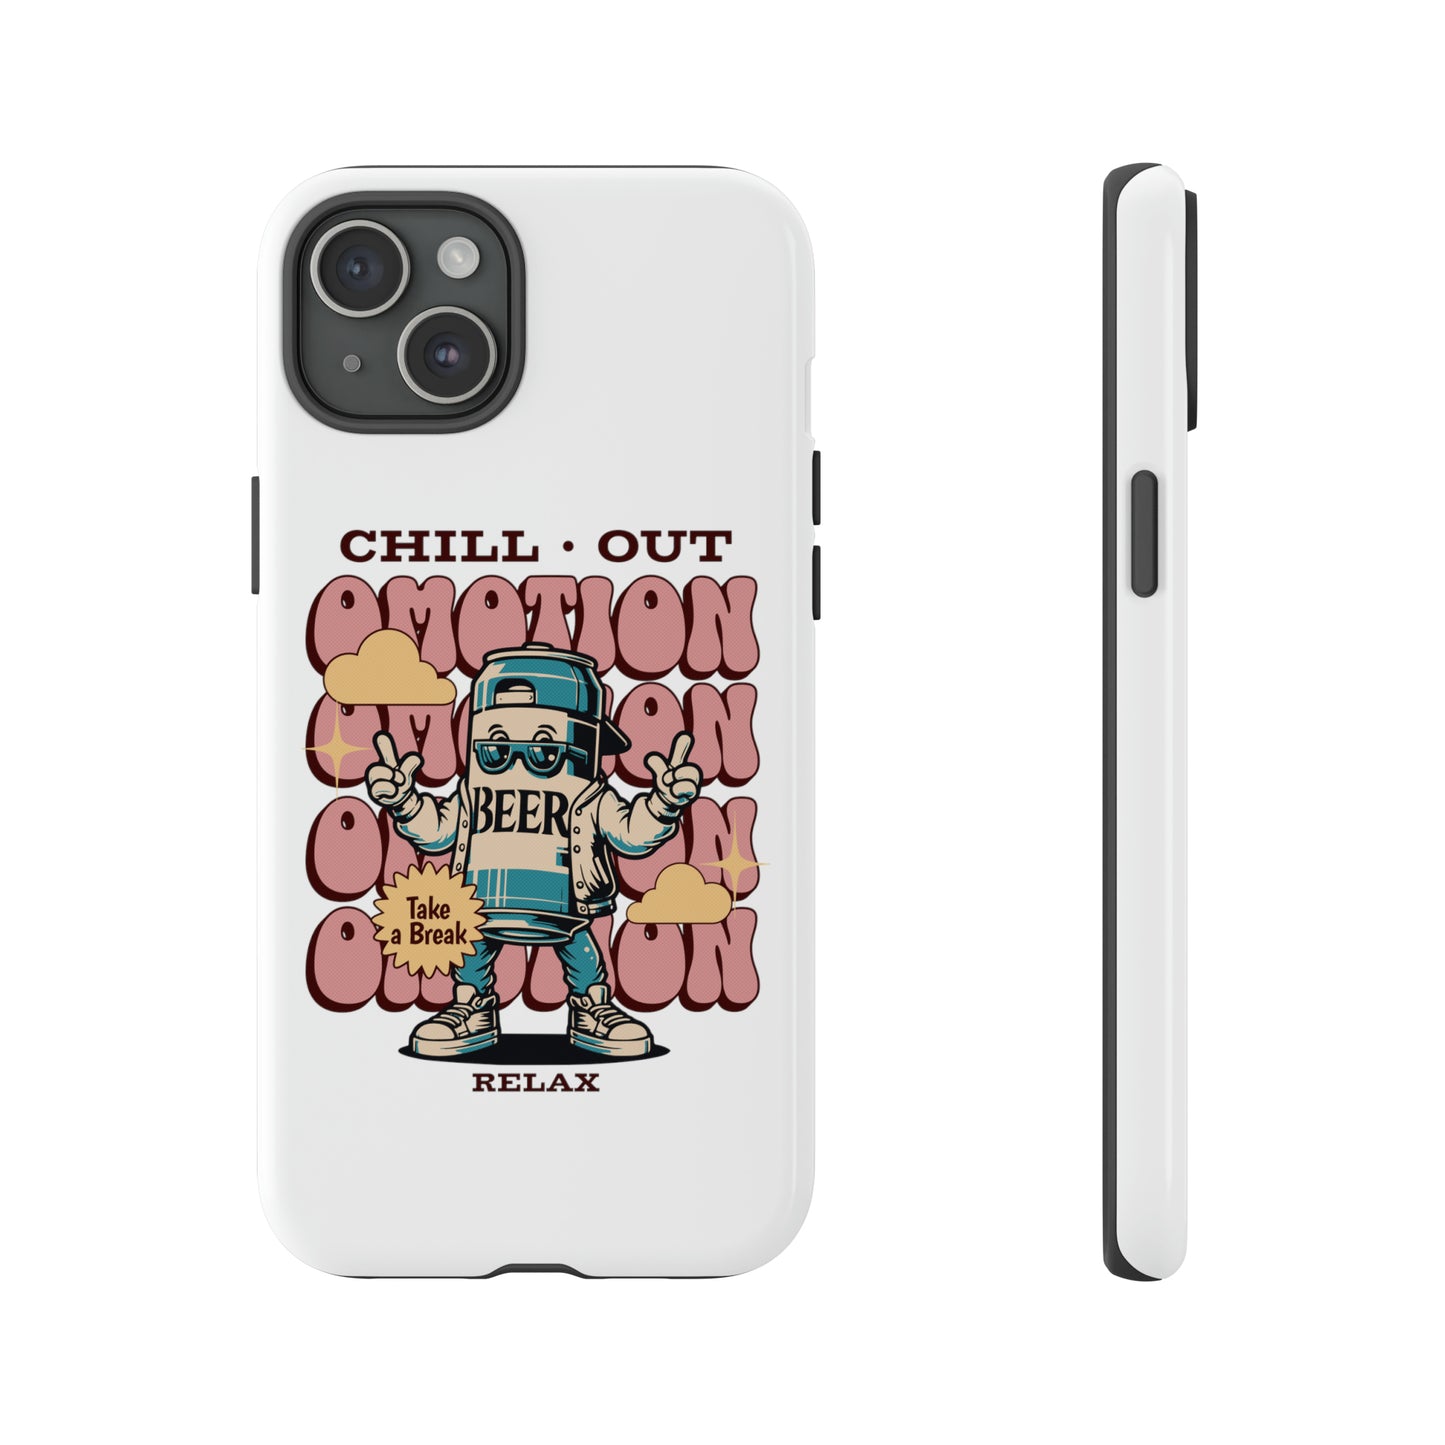 Chill Out Omotion iPhone Case